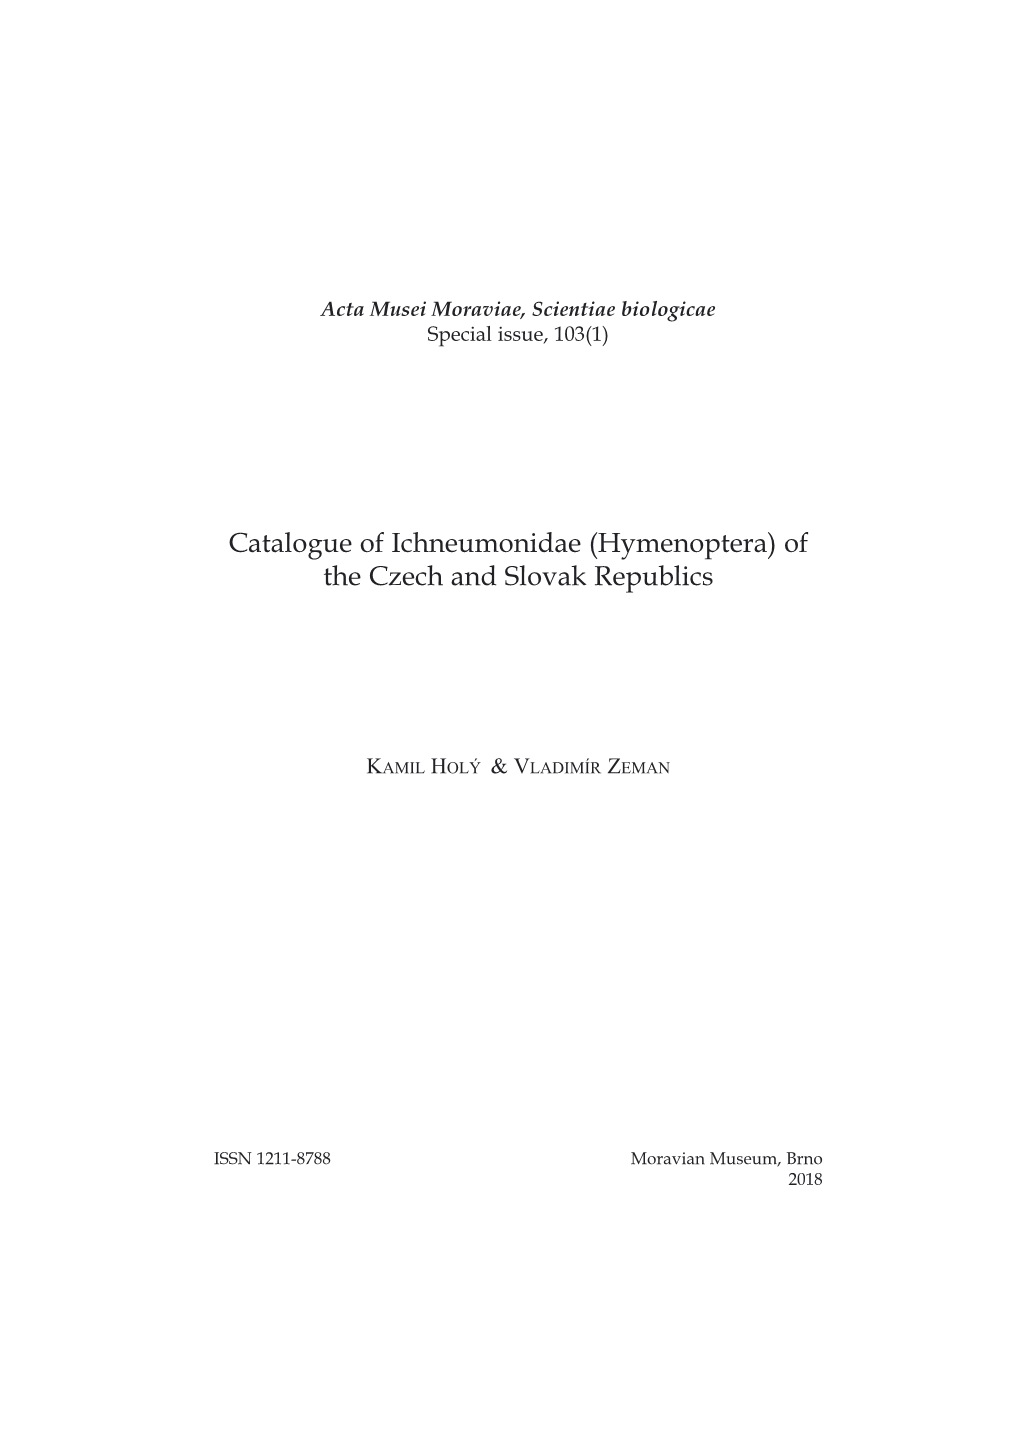 Catalogue of Ichneumonidae (Hymenoptera) of the Czech and Slovak Republics